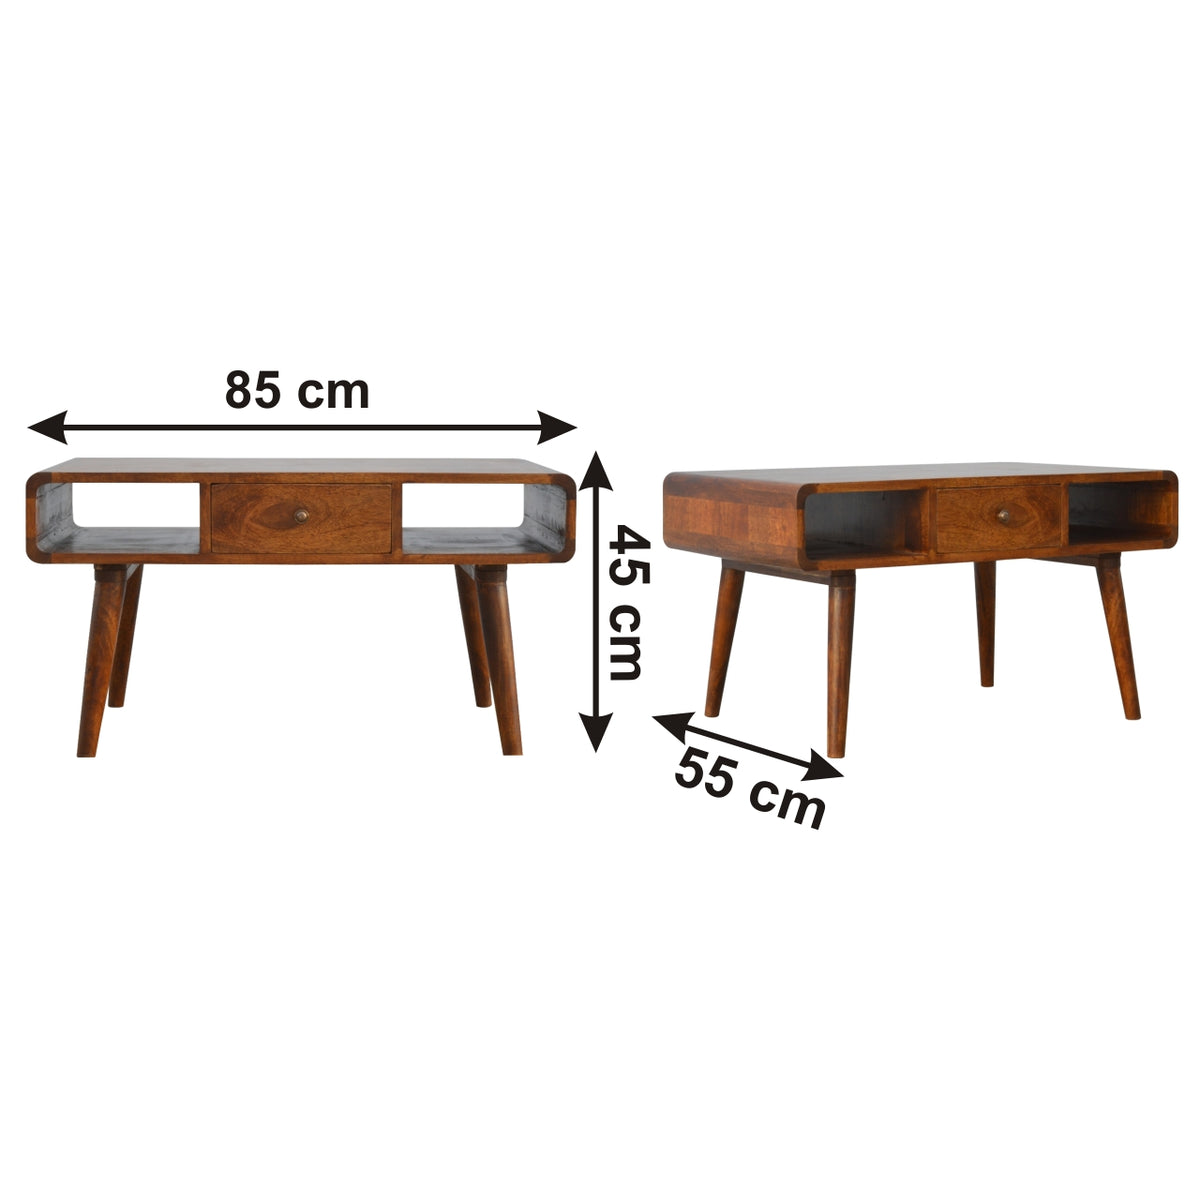 85cm coffee table with drawers uk